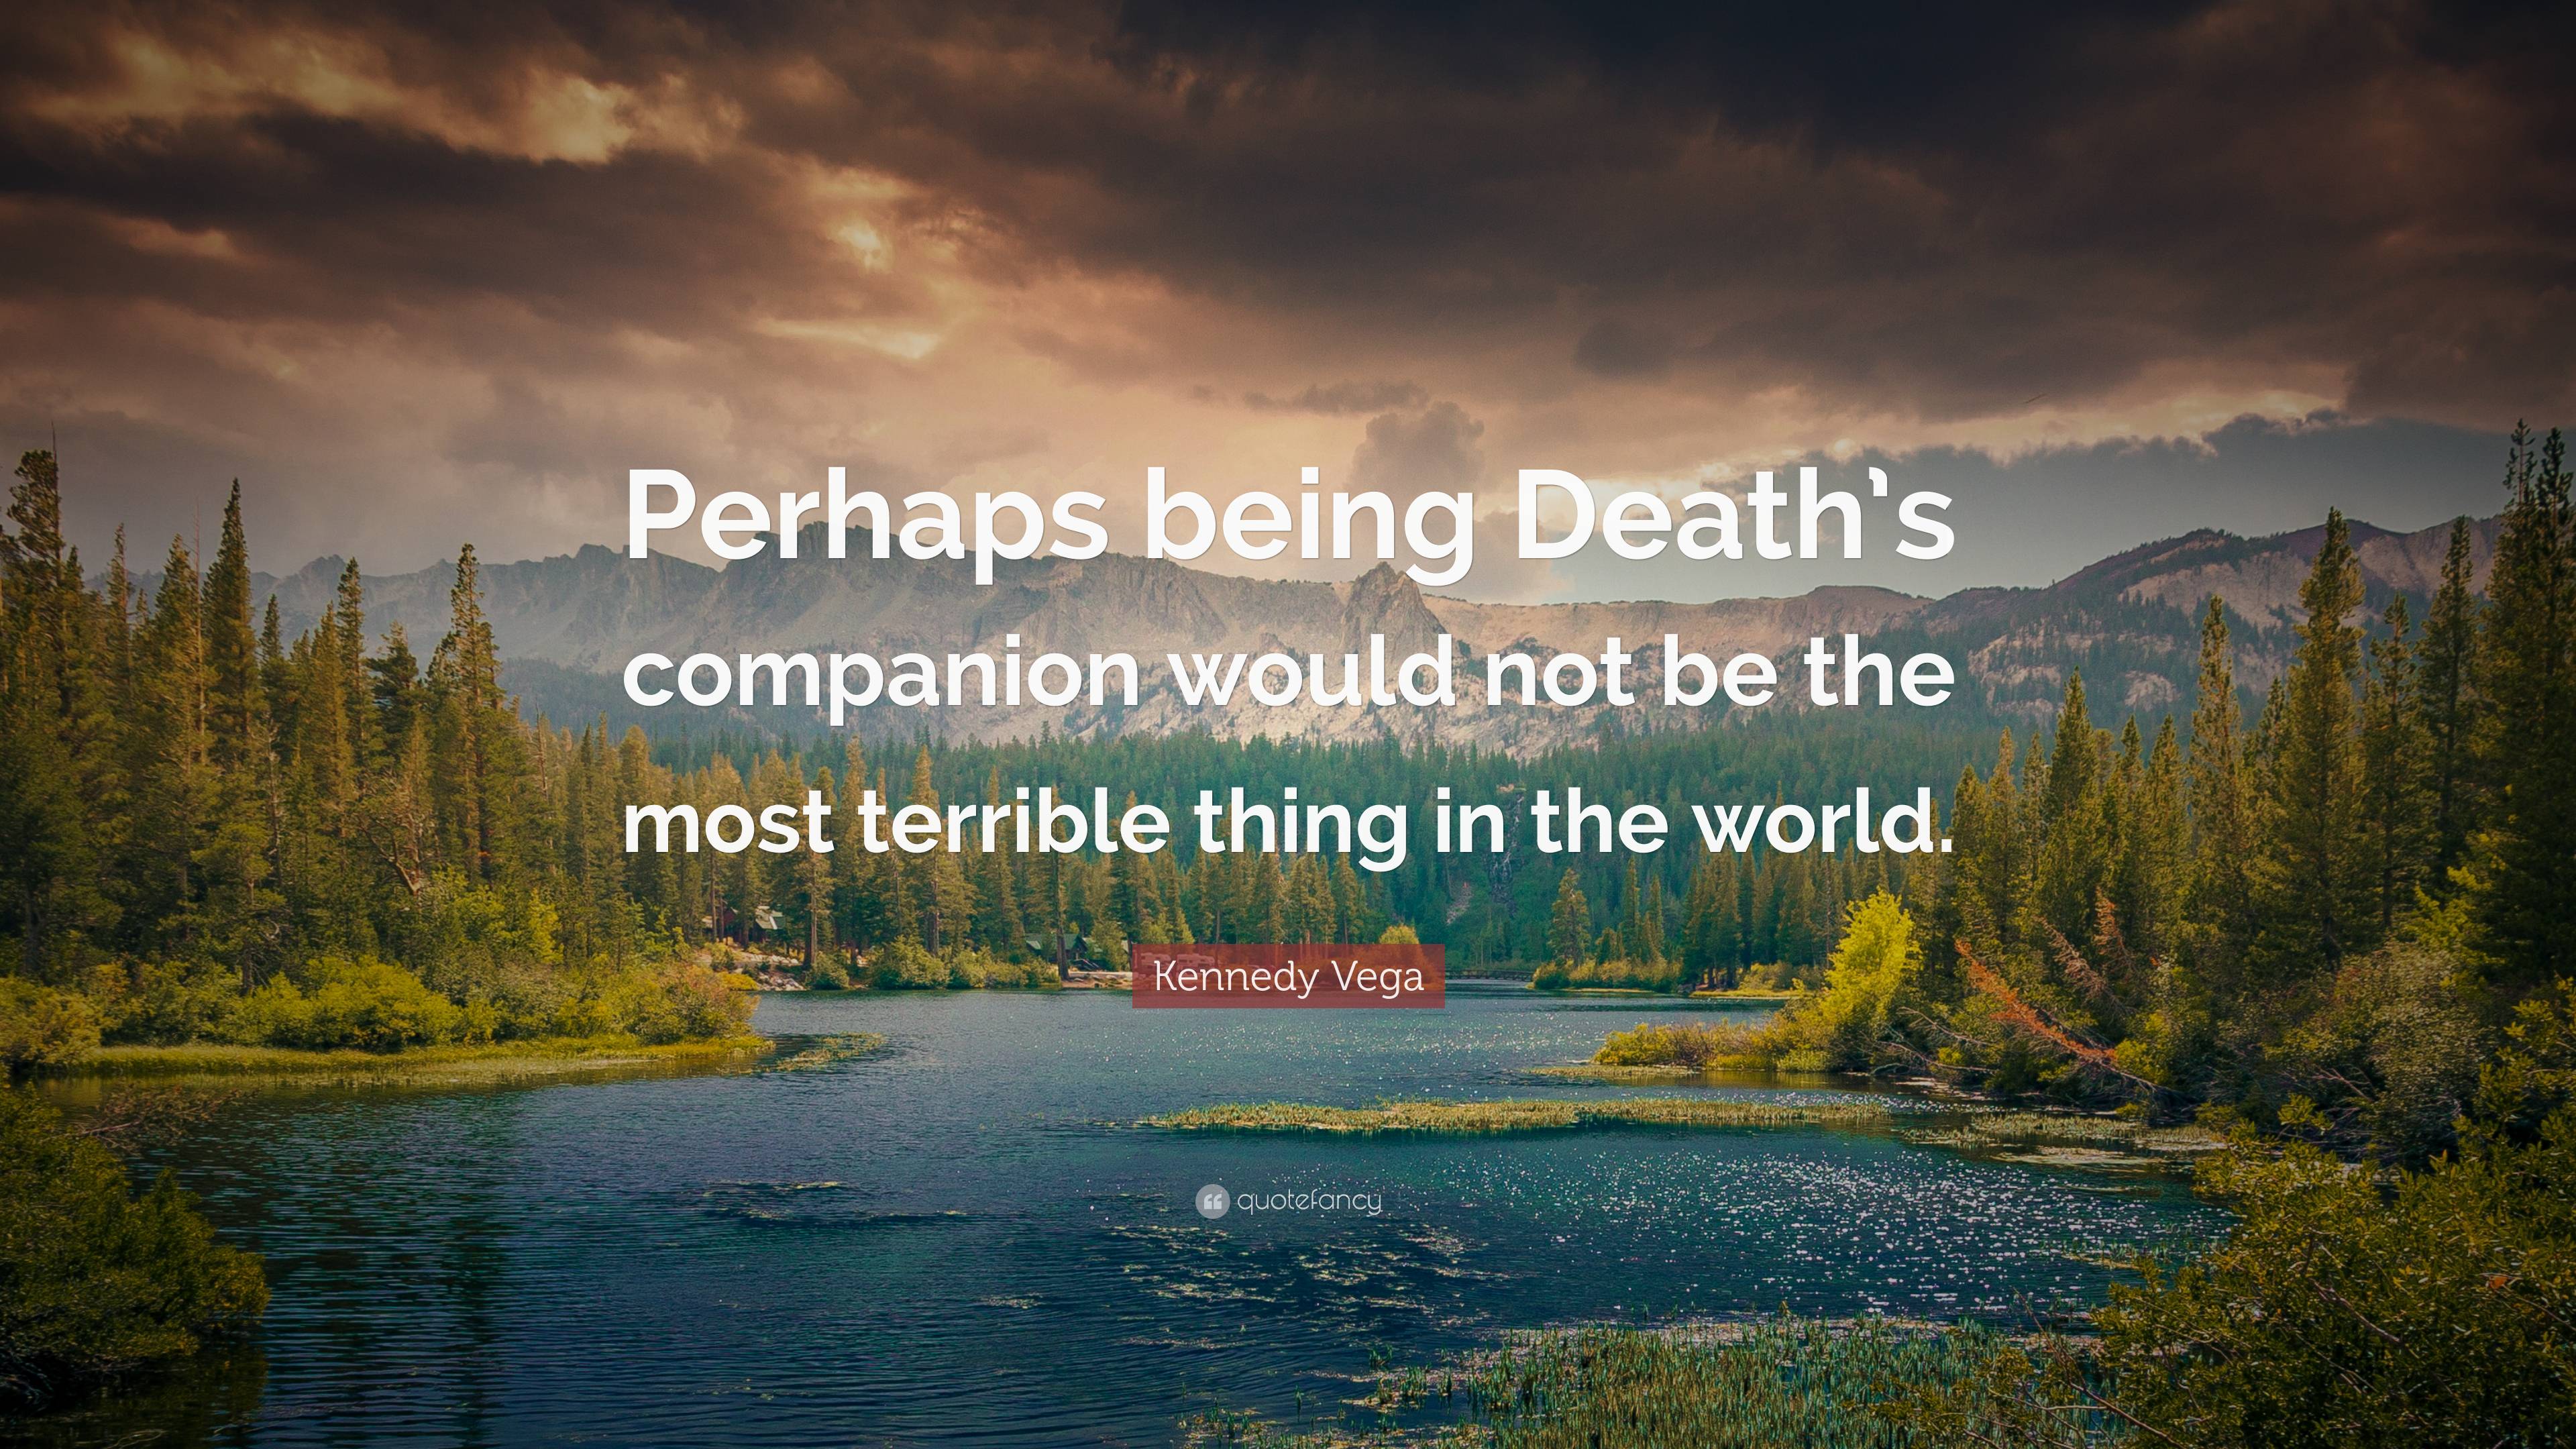 Kennedy Vega Quote: “Perhaps being Death’s companion would not be the ...